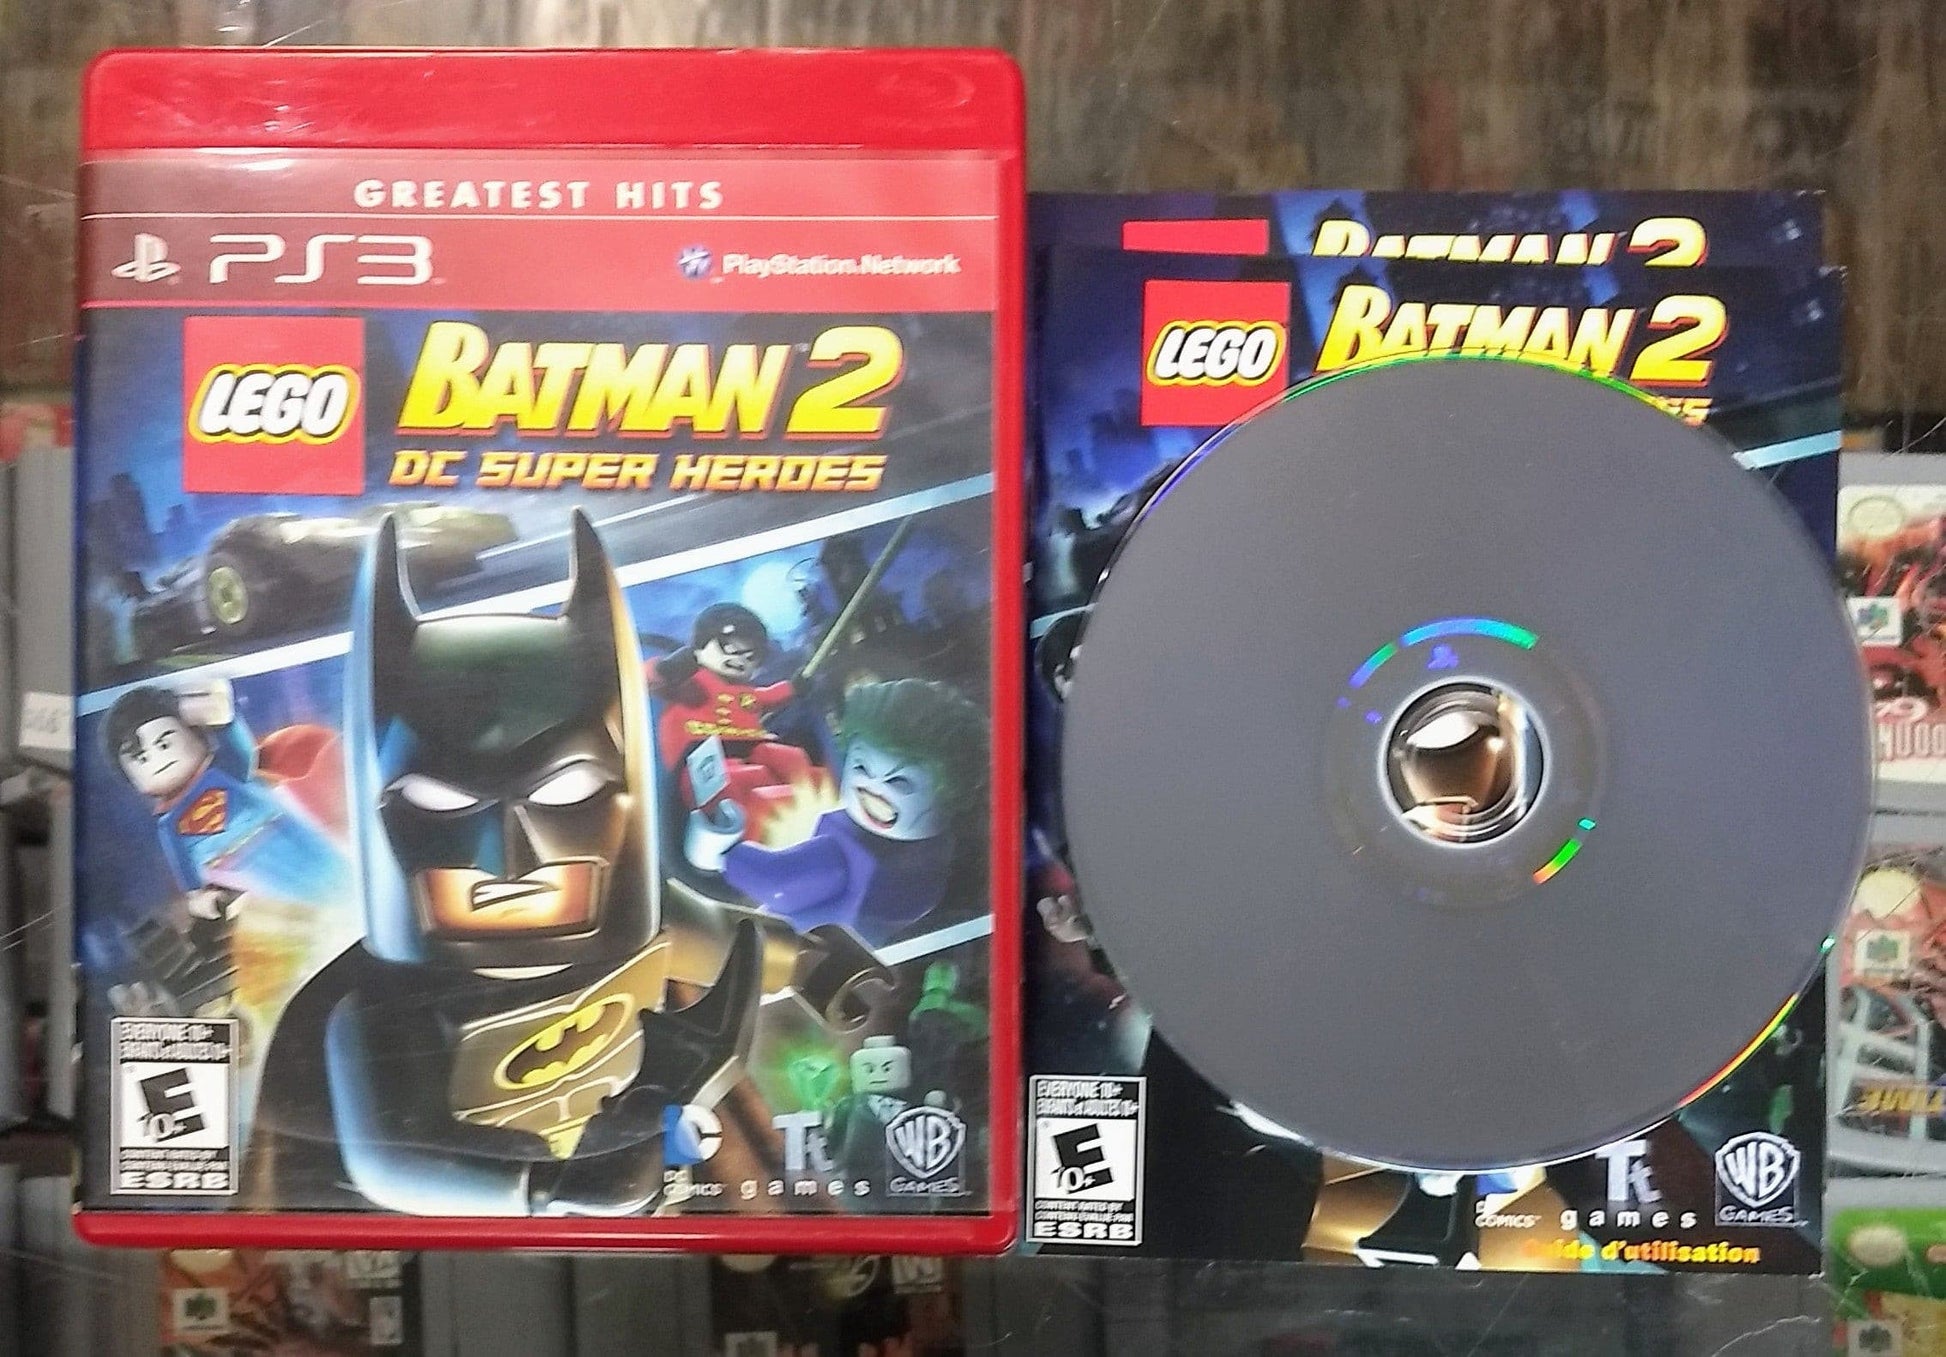 LEGO BATMAN 2 DC SUPER HEROES GREATEST HITS PLAYSTATION 3 PS3 - jeux video game-x